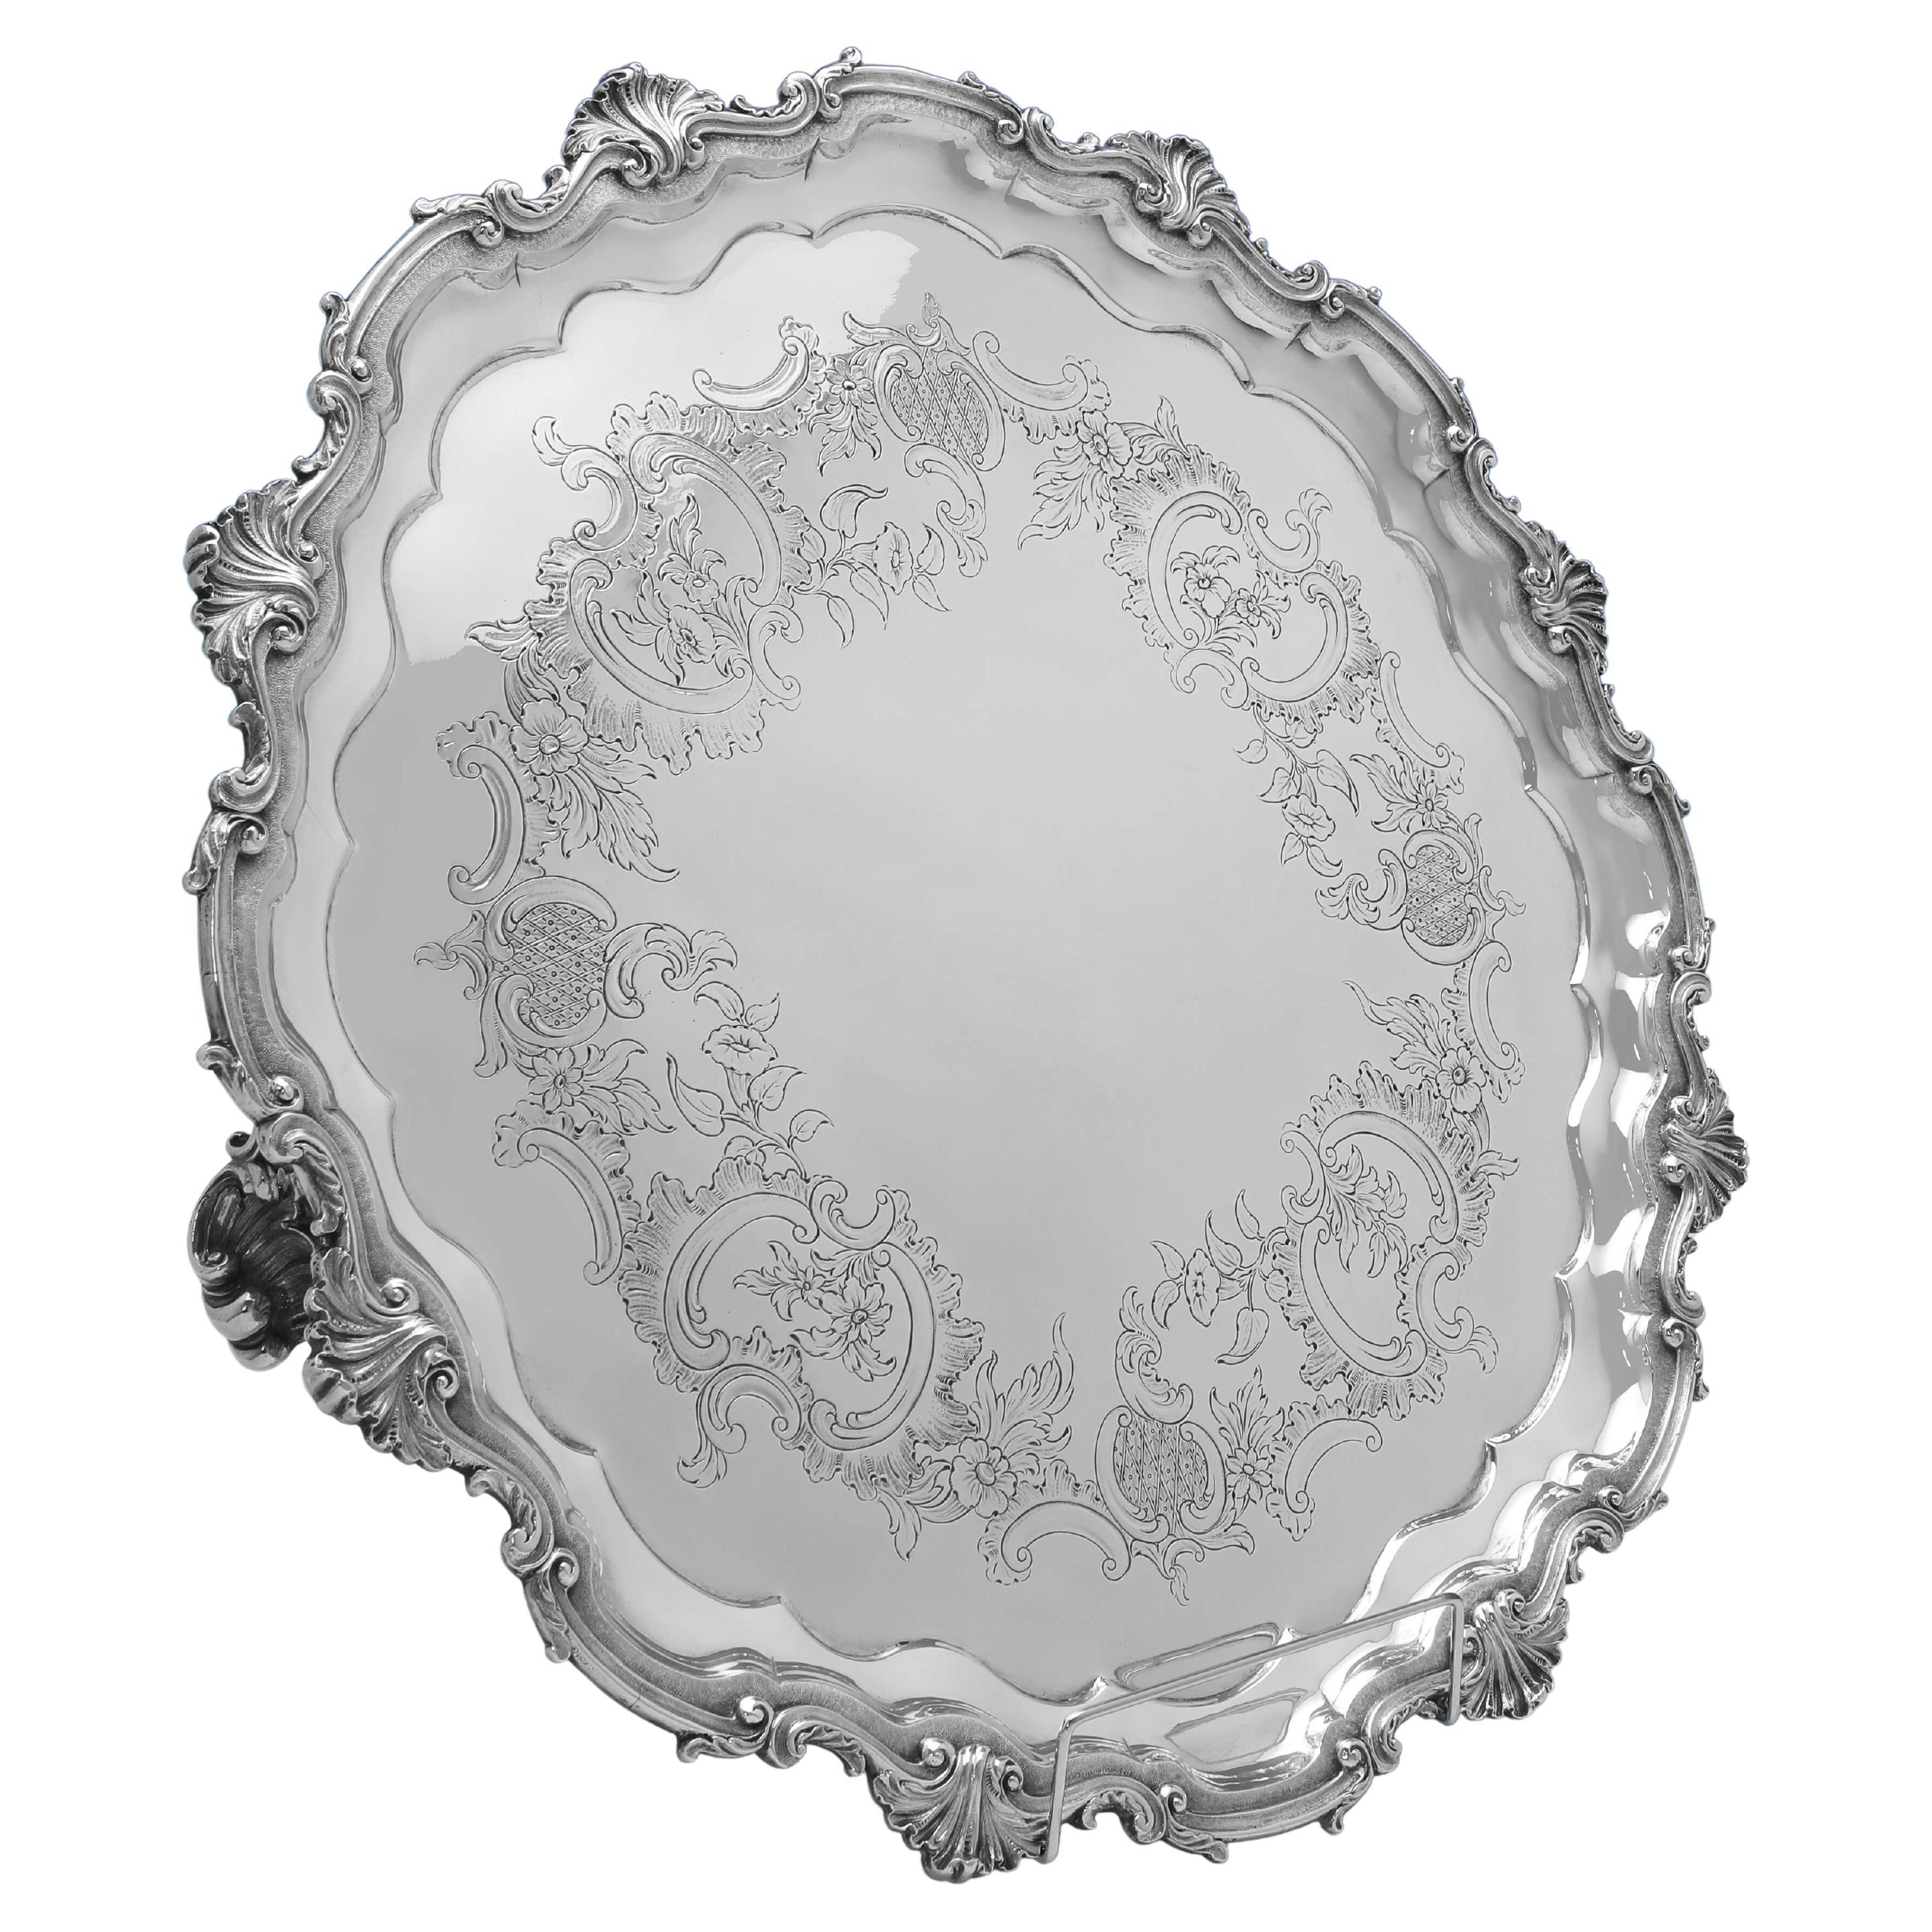 Benjamin Smith - 20 Inch Victorian Antique Sterling Silver Salver - London 1844 For Sale